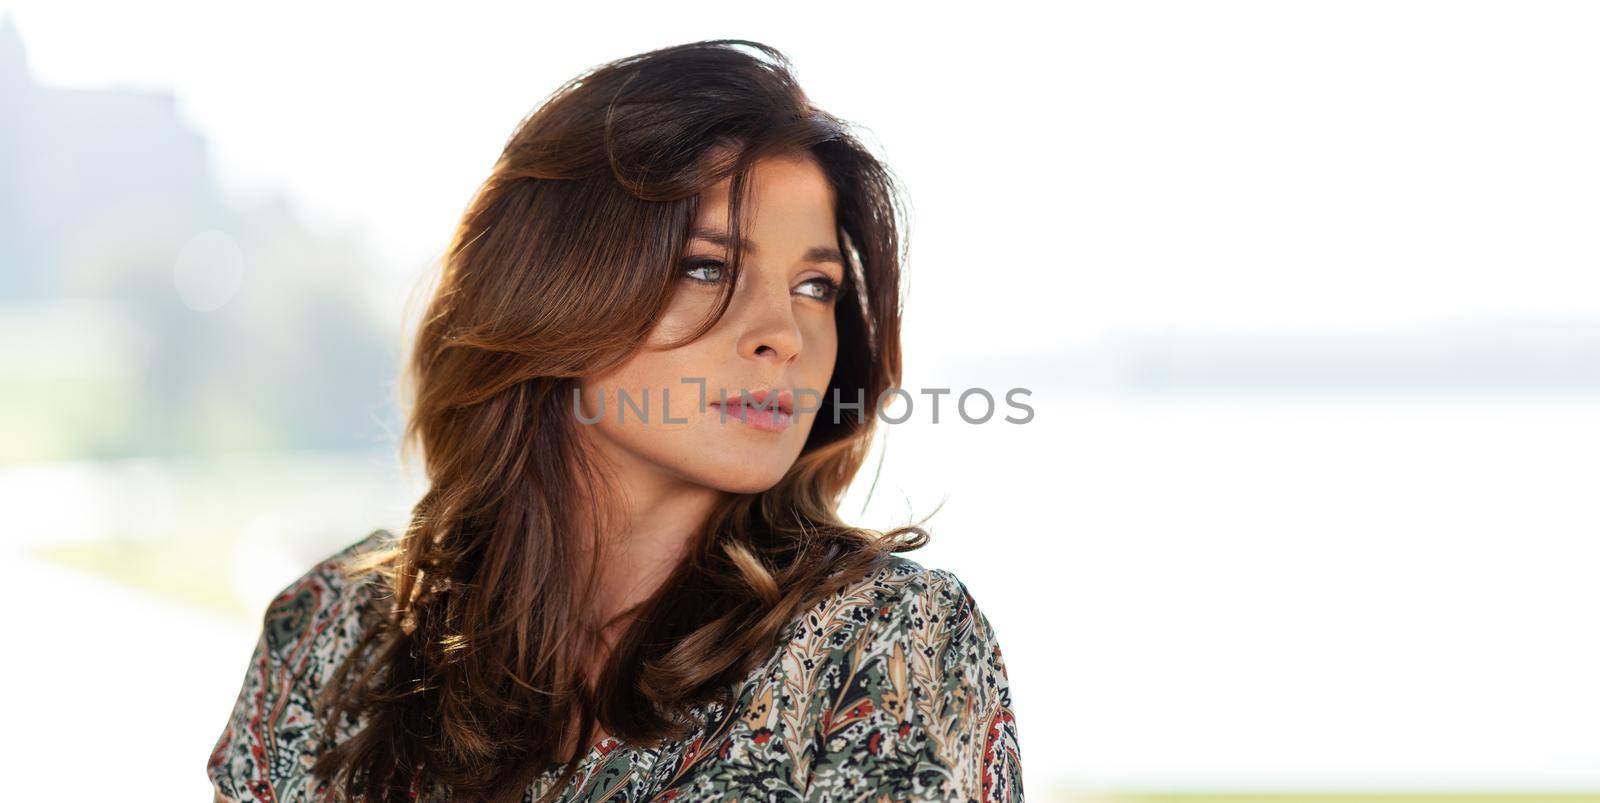 Portrait of a lovely fashion model with nice hairstyle posing outdoors in the seacoast resort on a sunny day (copy space)